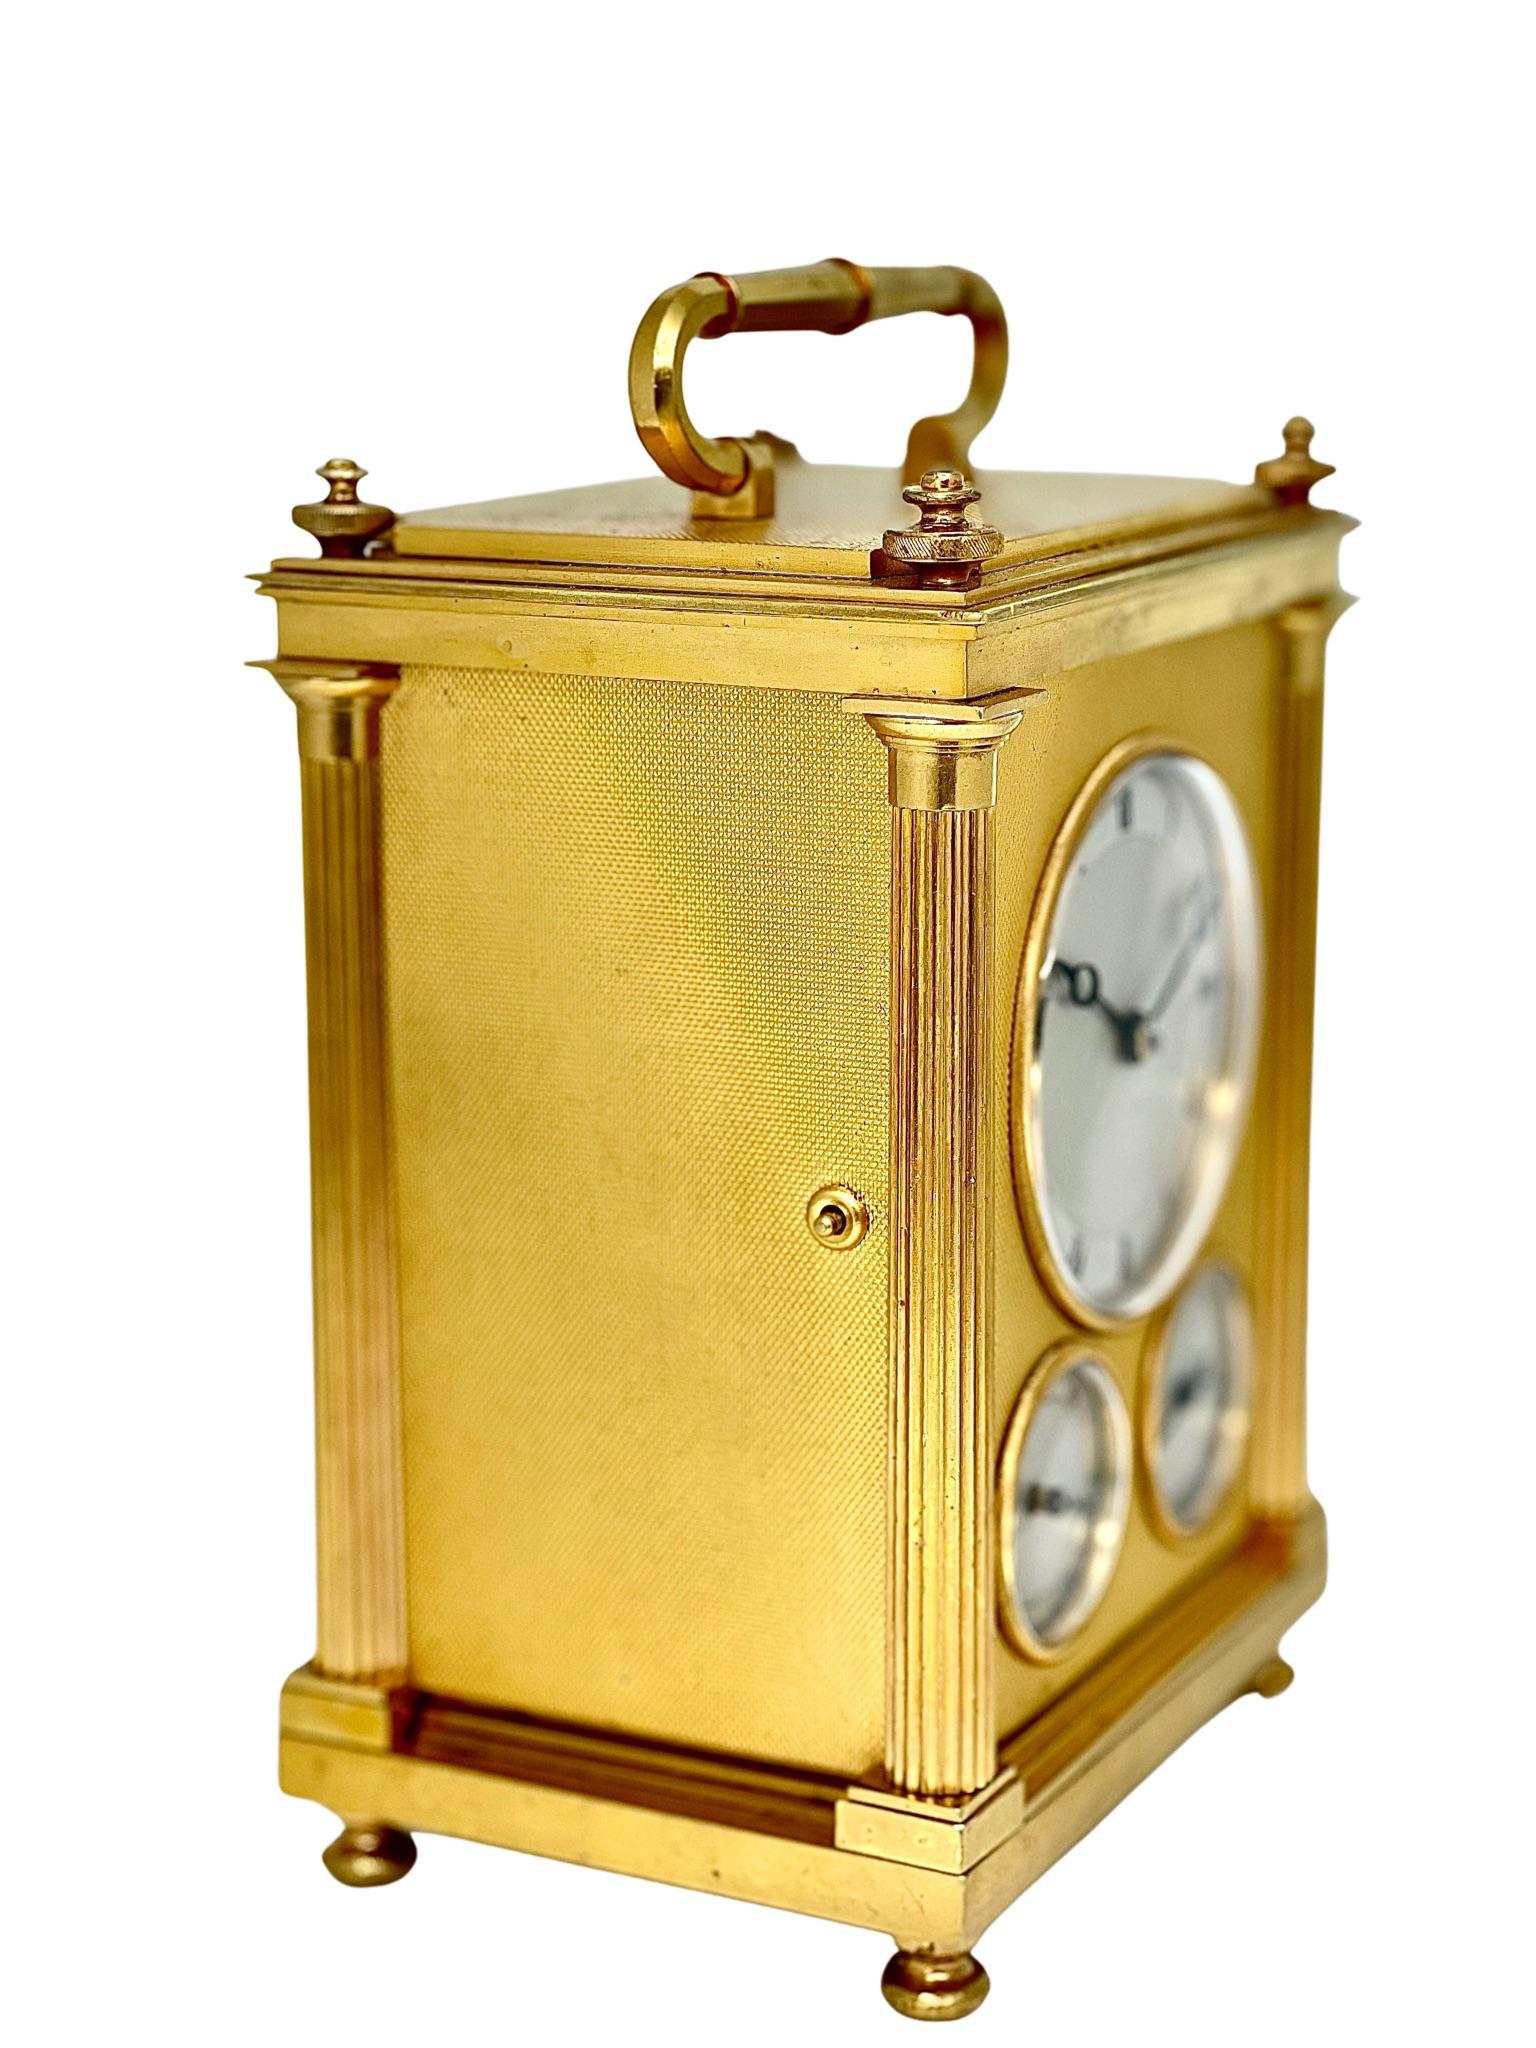 A beautiful English grande-sonnerie striking and calendrical carriage clock, with a carrying handle typical of carriage clocks from this era.

The English case is fine and substantially made, with fluted columns and and inset engine-turned panels